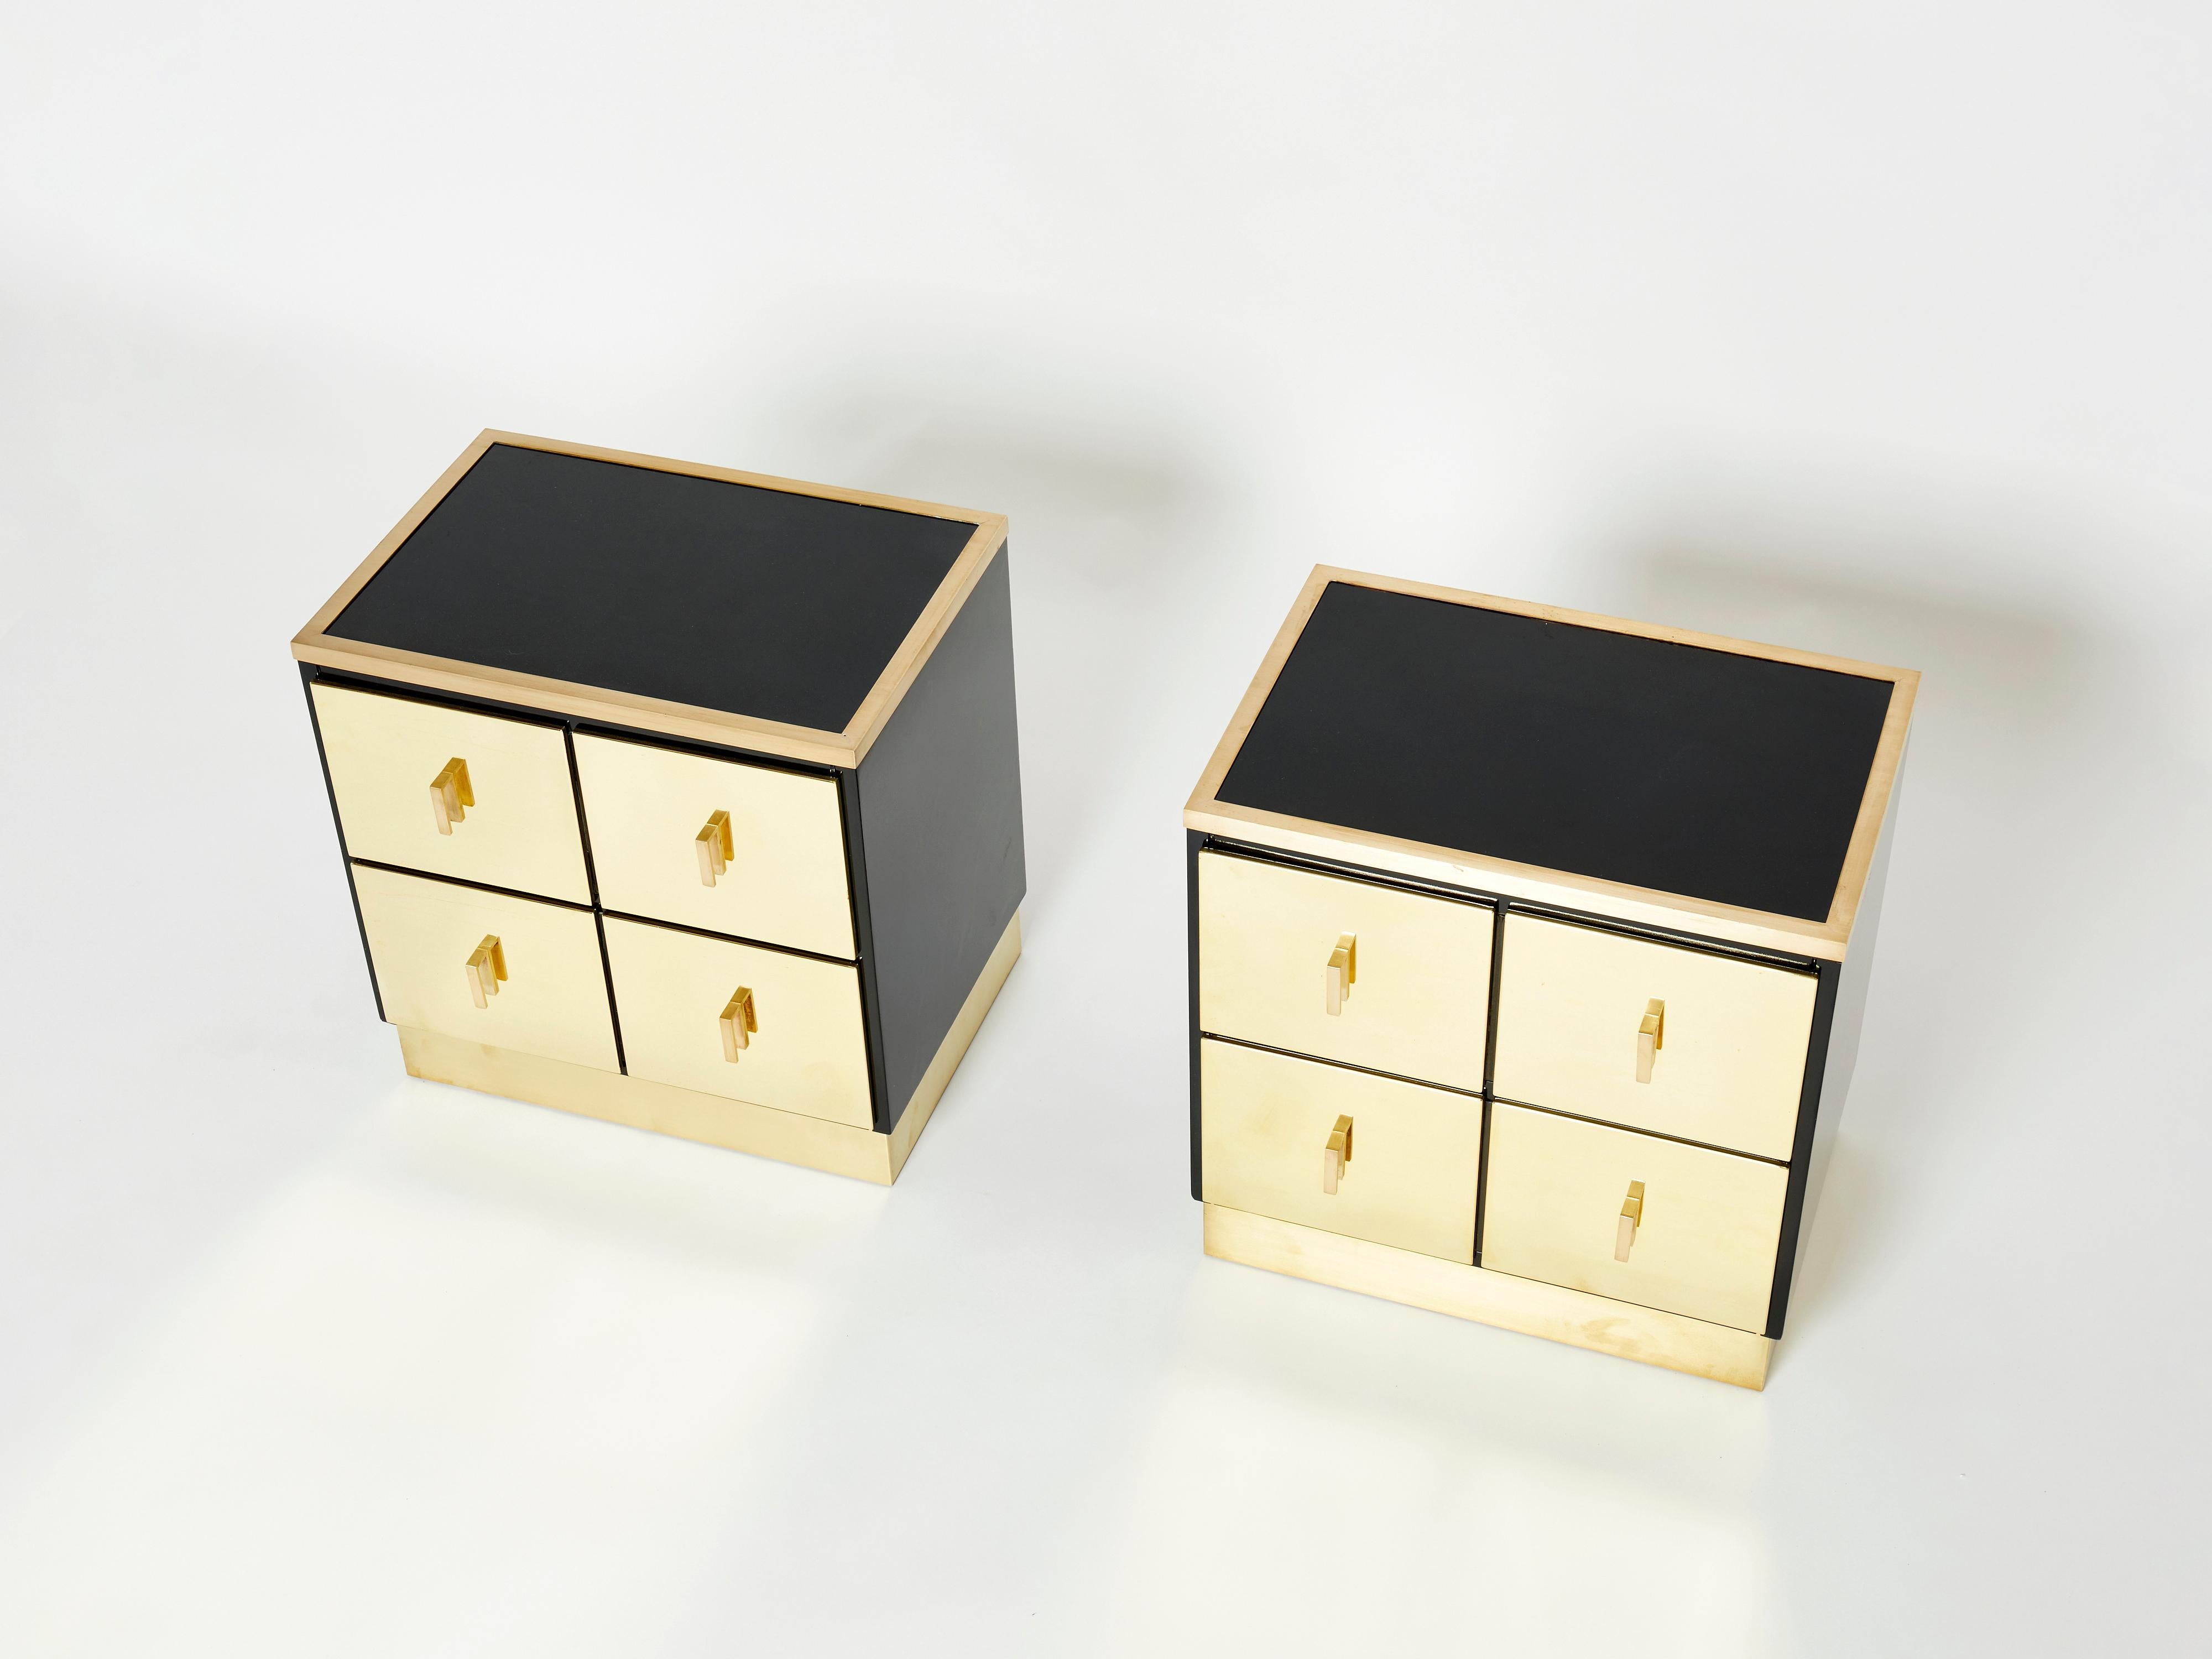 This rare pair of Italian mid-century two drawers black lacquered nightstands or end tables would be stunning in any room. Designed by Luciano Frigerio for Frigerio Di Desio in Italy in the early 1970s, the shiny black lacquer paired with the mix of